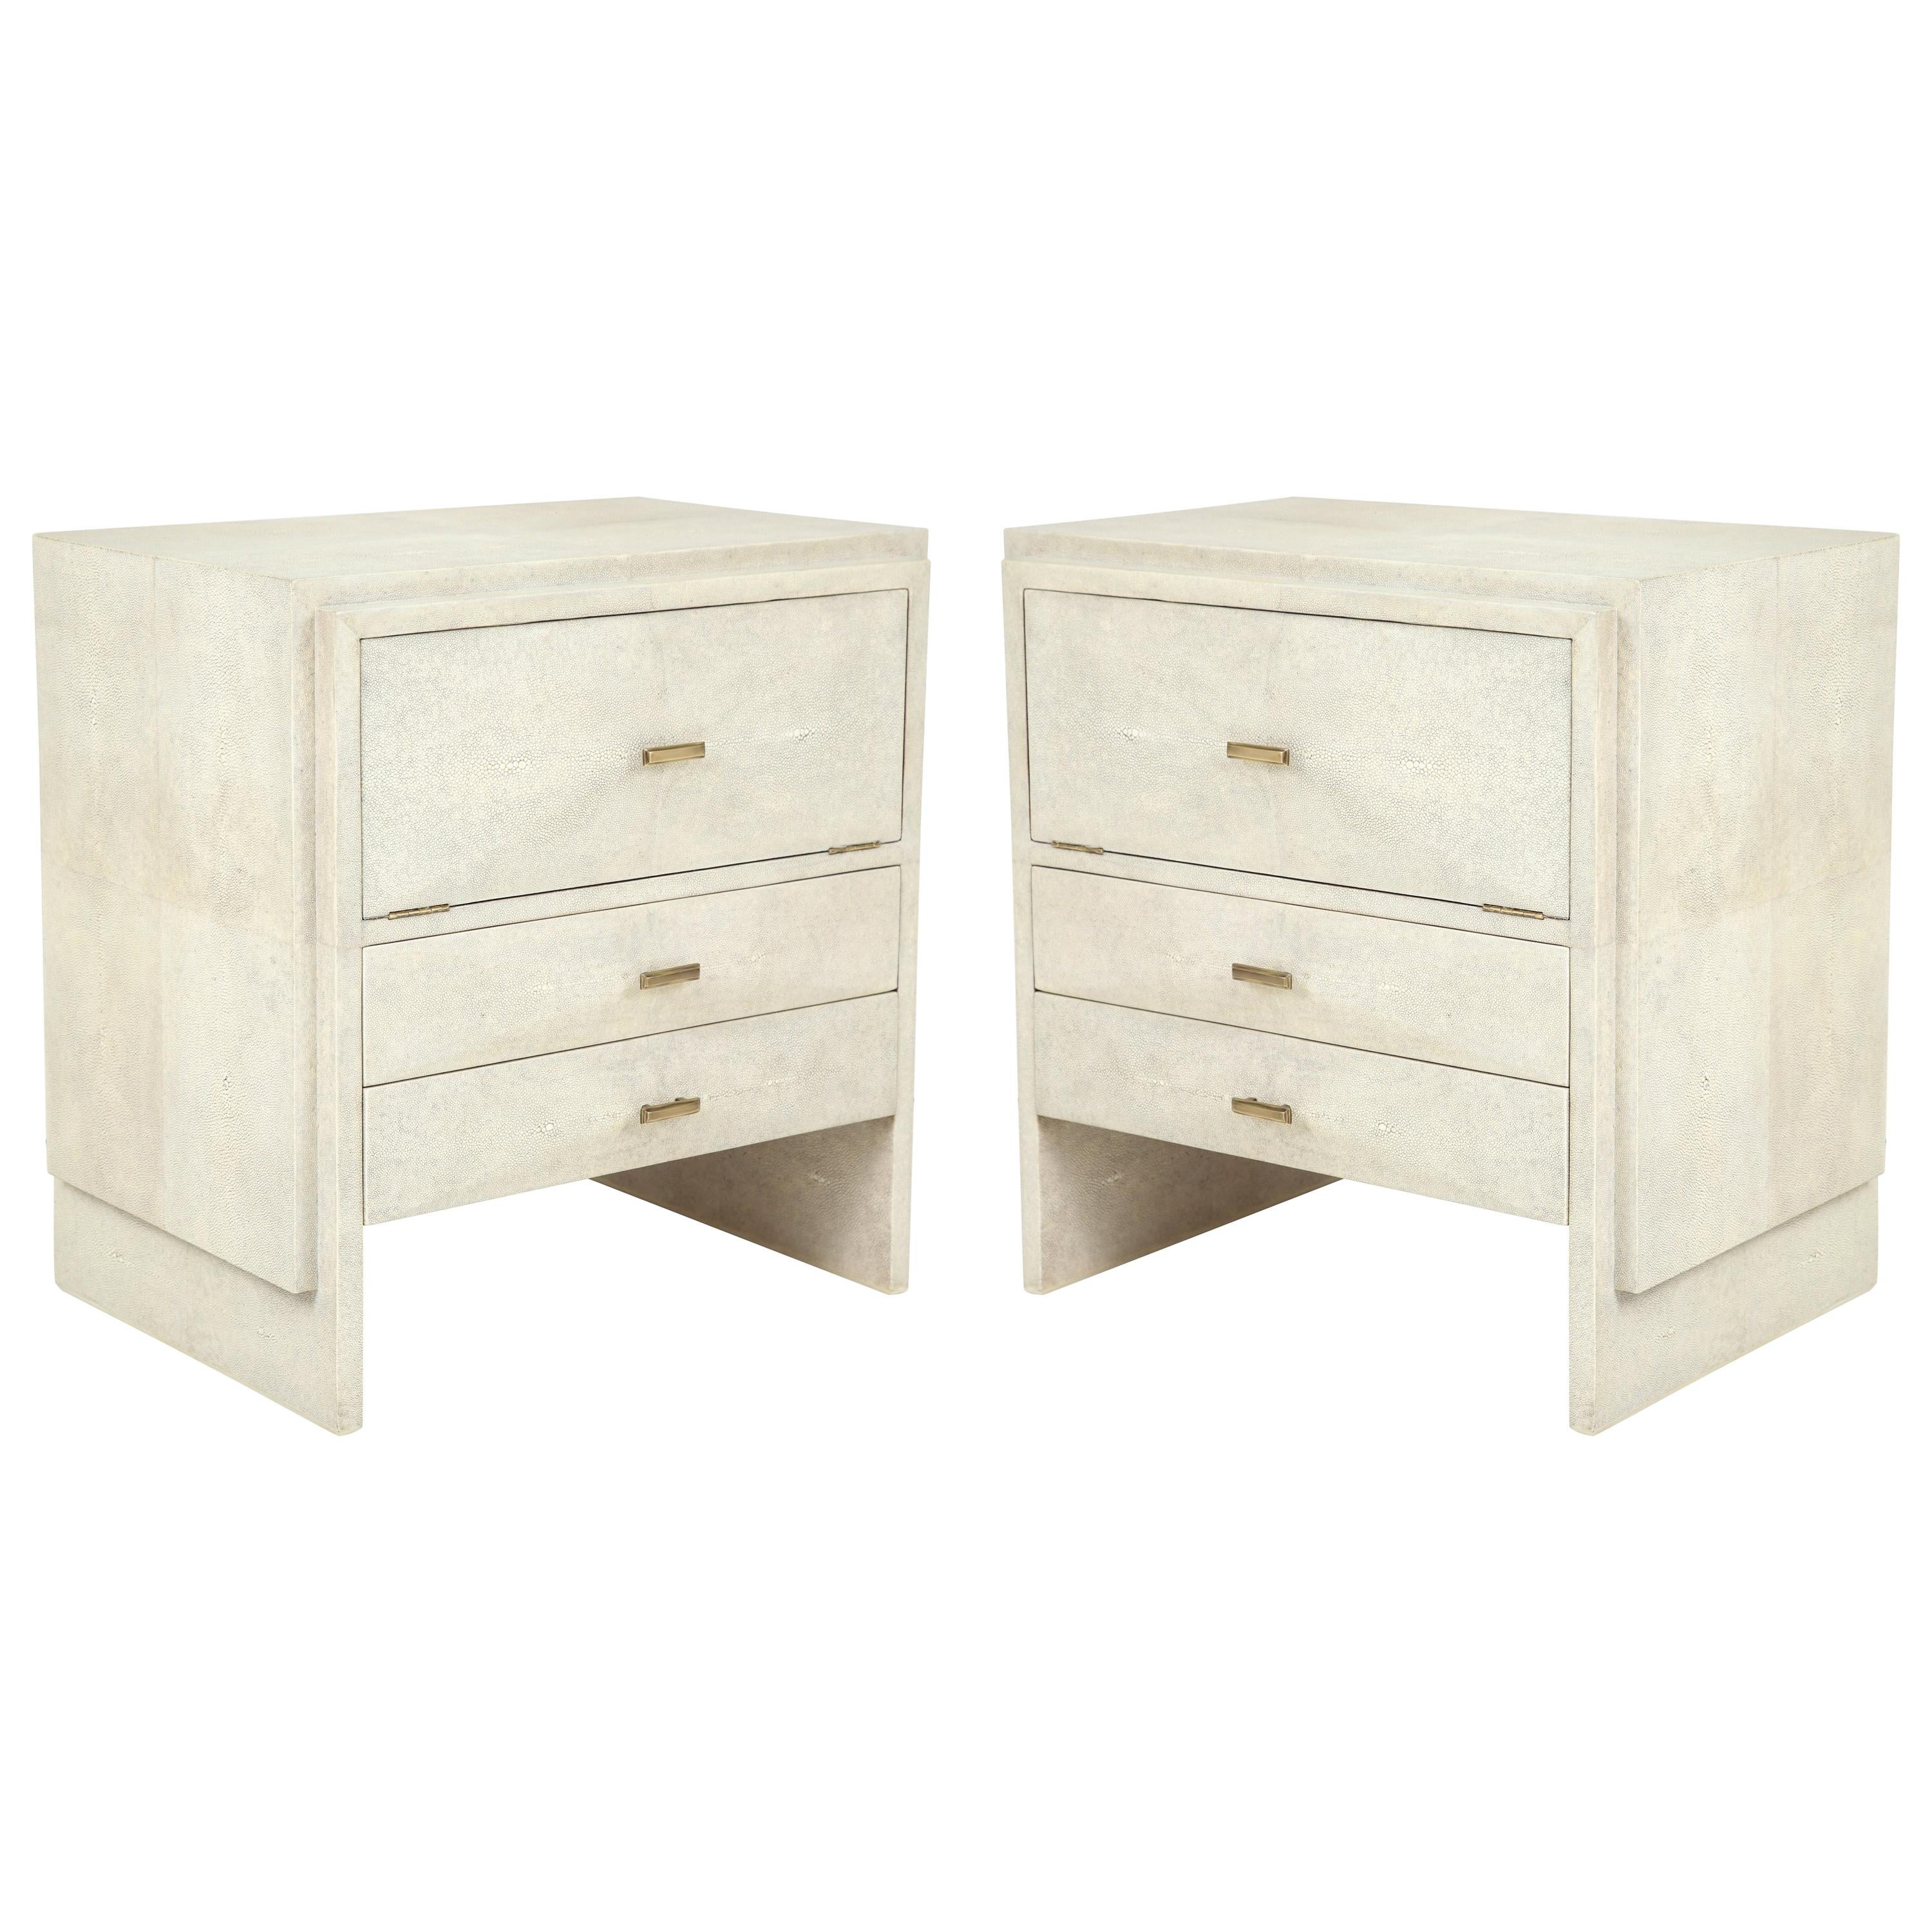 Shagreen Side Tables or Nightstands, Cream Colored Shagreen, Designed in France